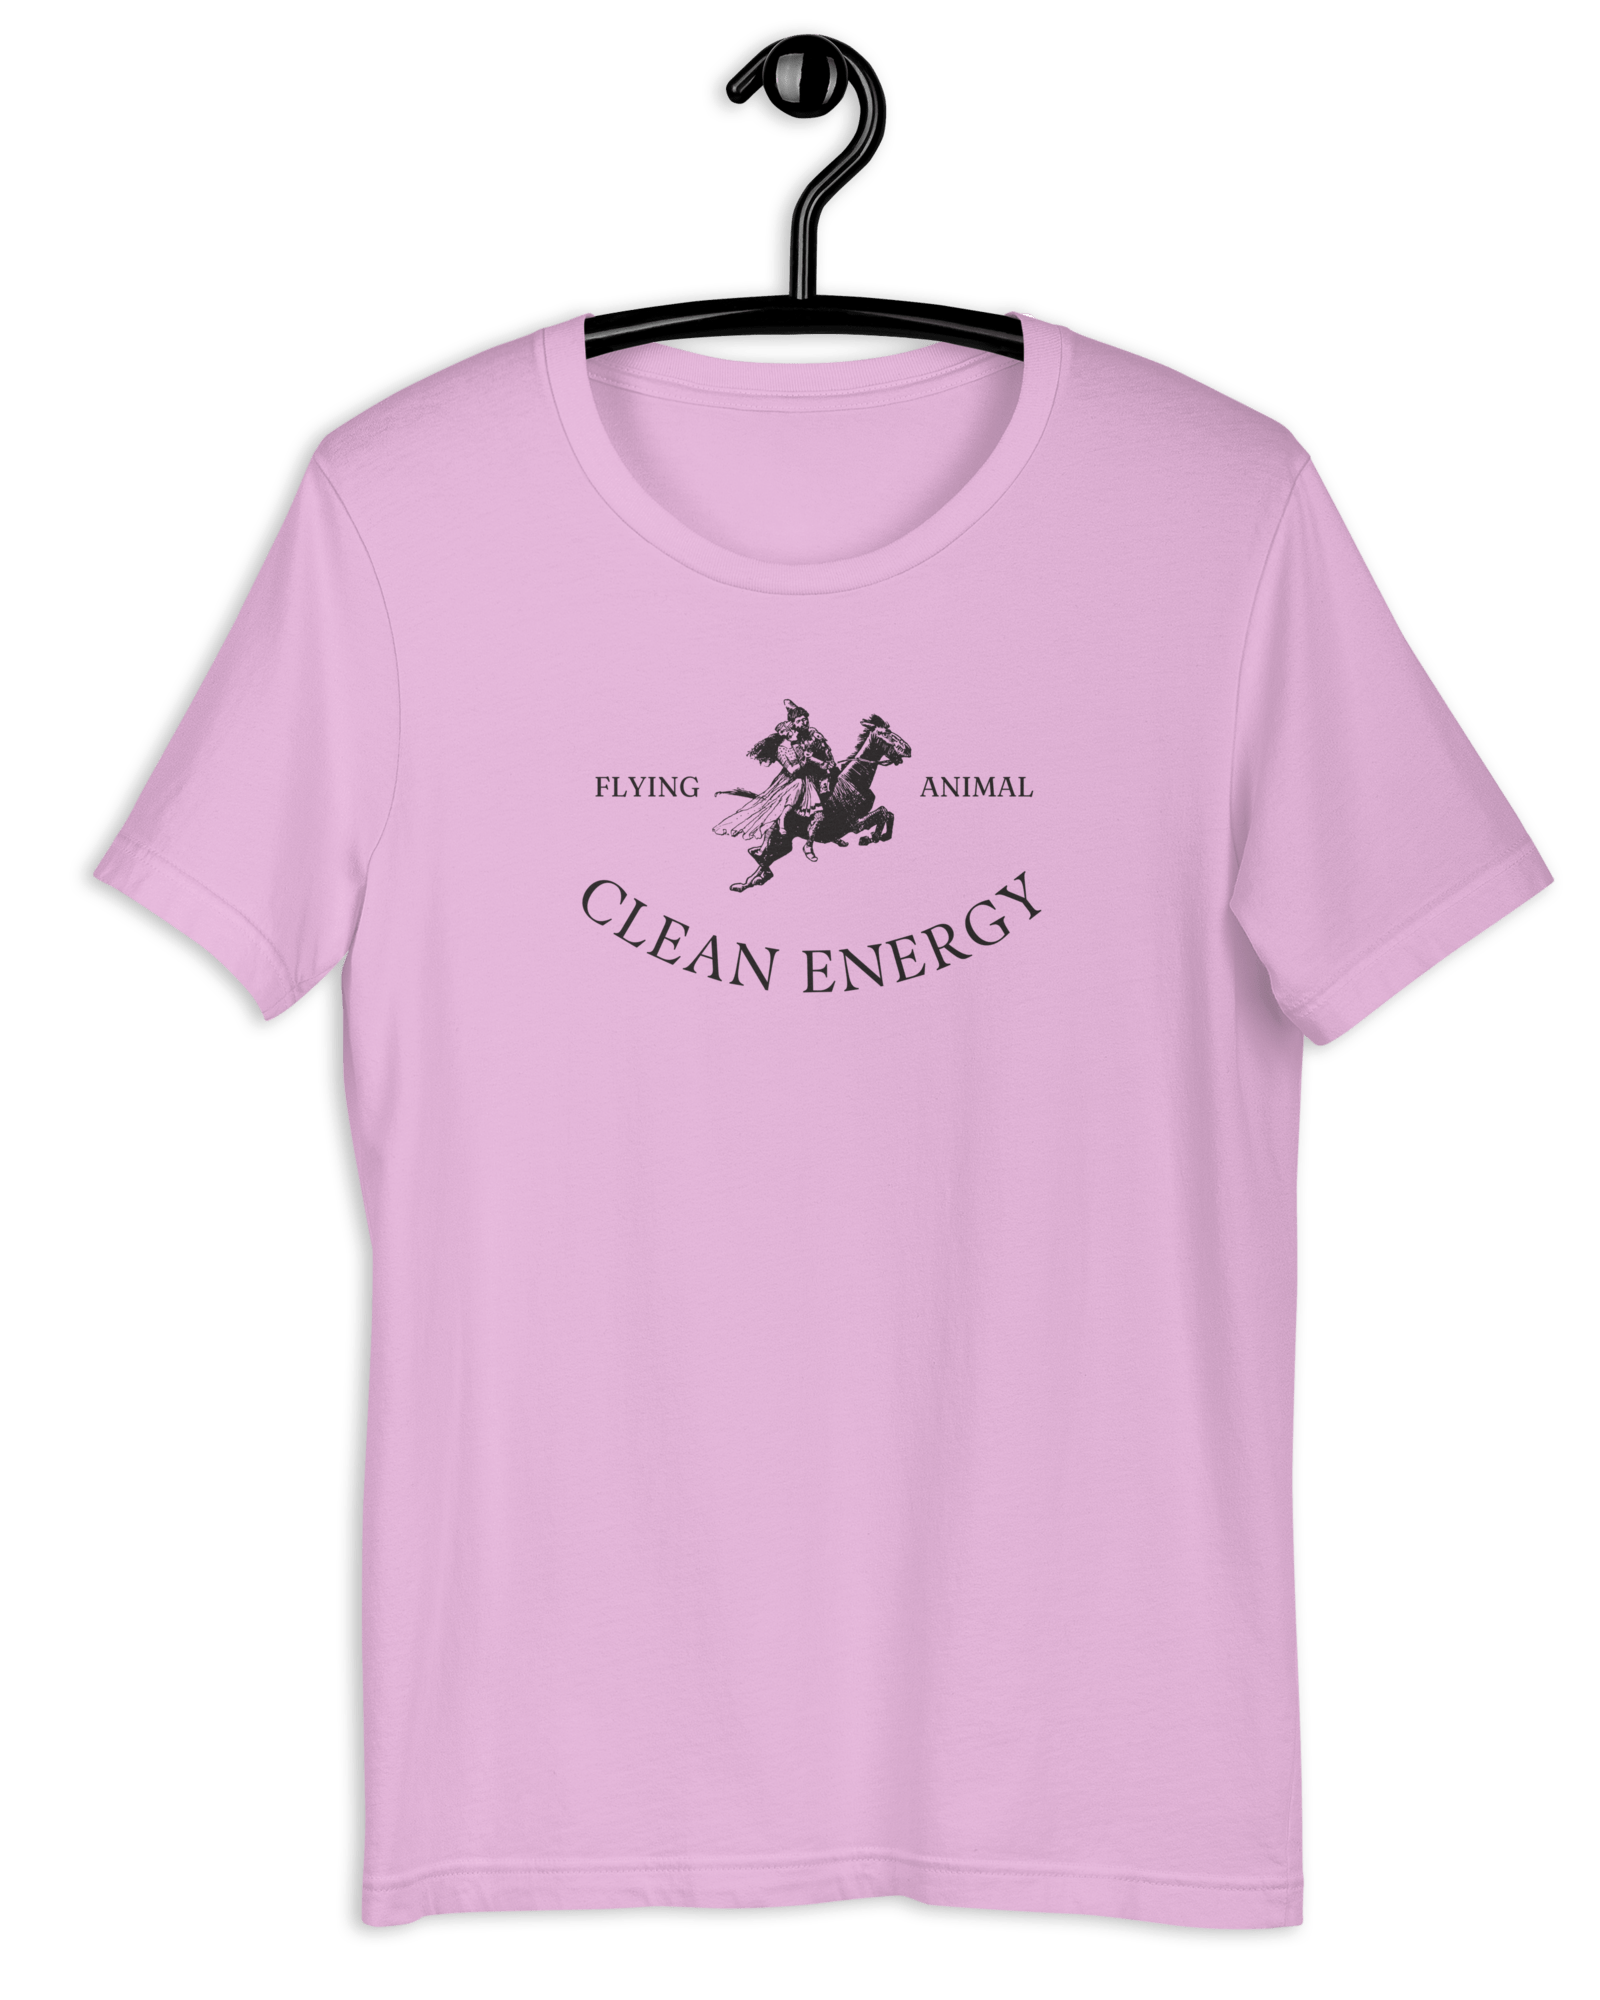 Flying Animal Clean Energy T-shirt Lilac / S Jolly & Goode